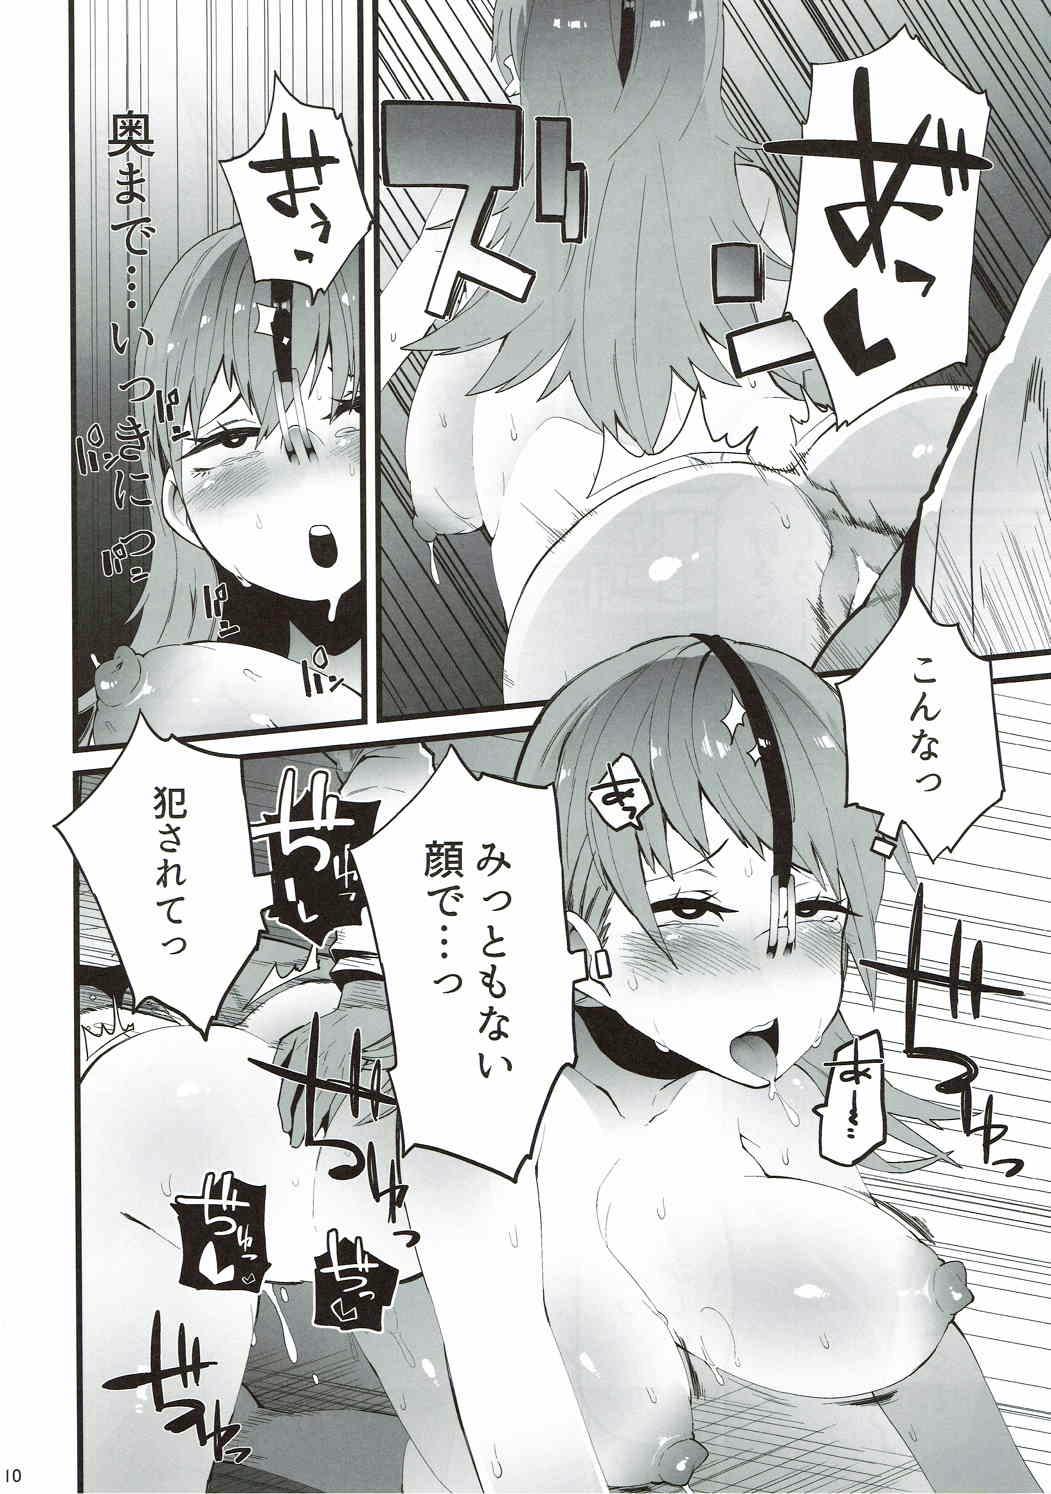 Bitch Yarasete Ooicchi - Kantai collection Bed - Page 9